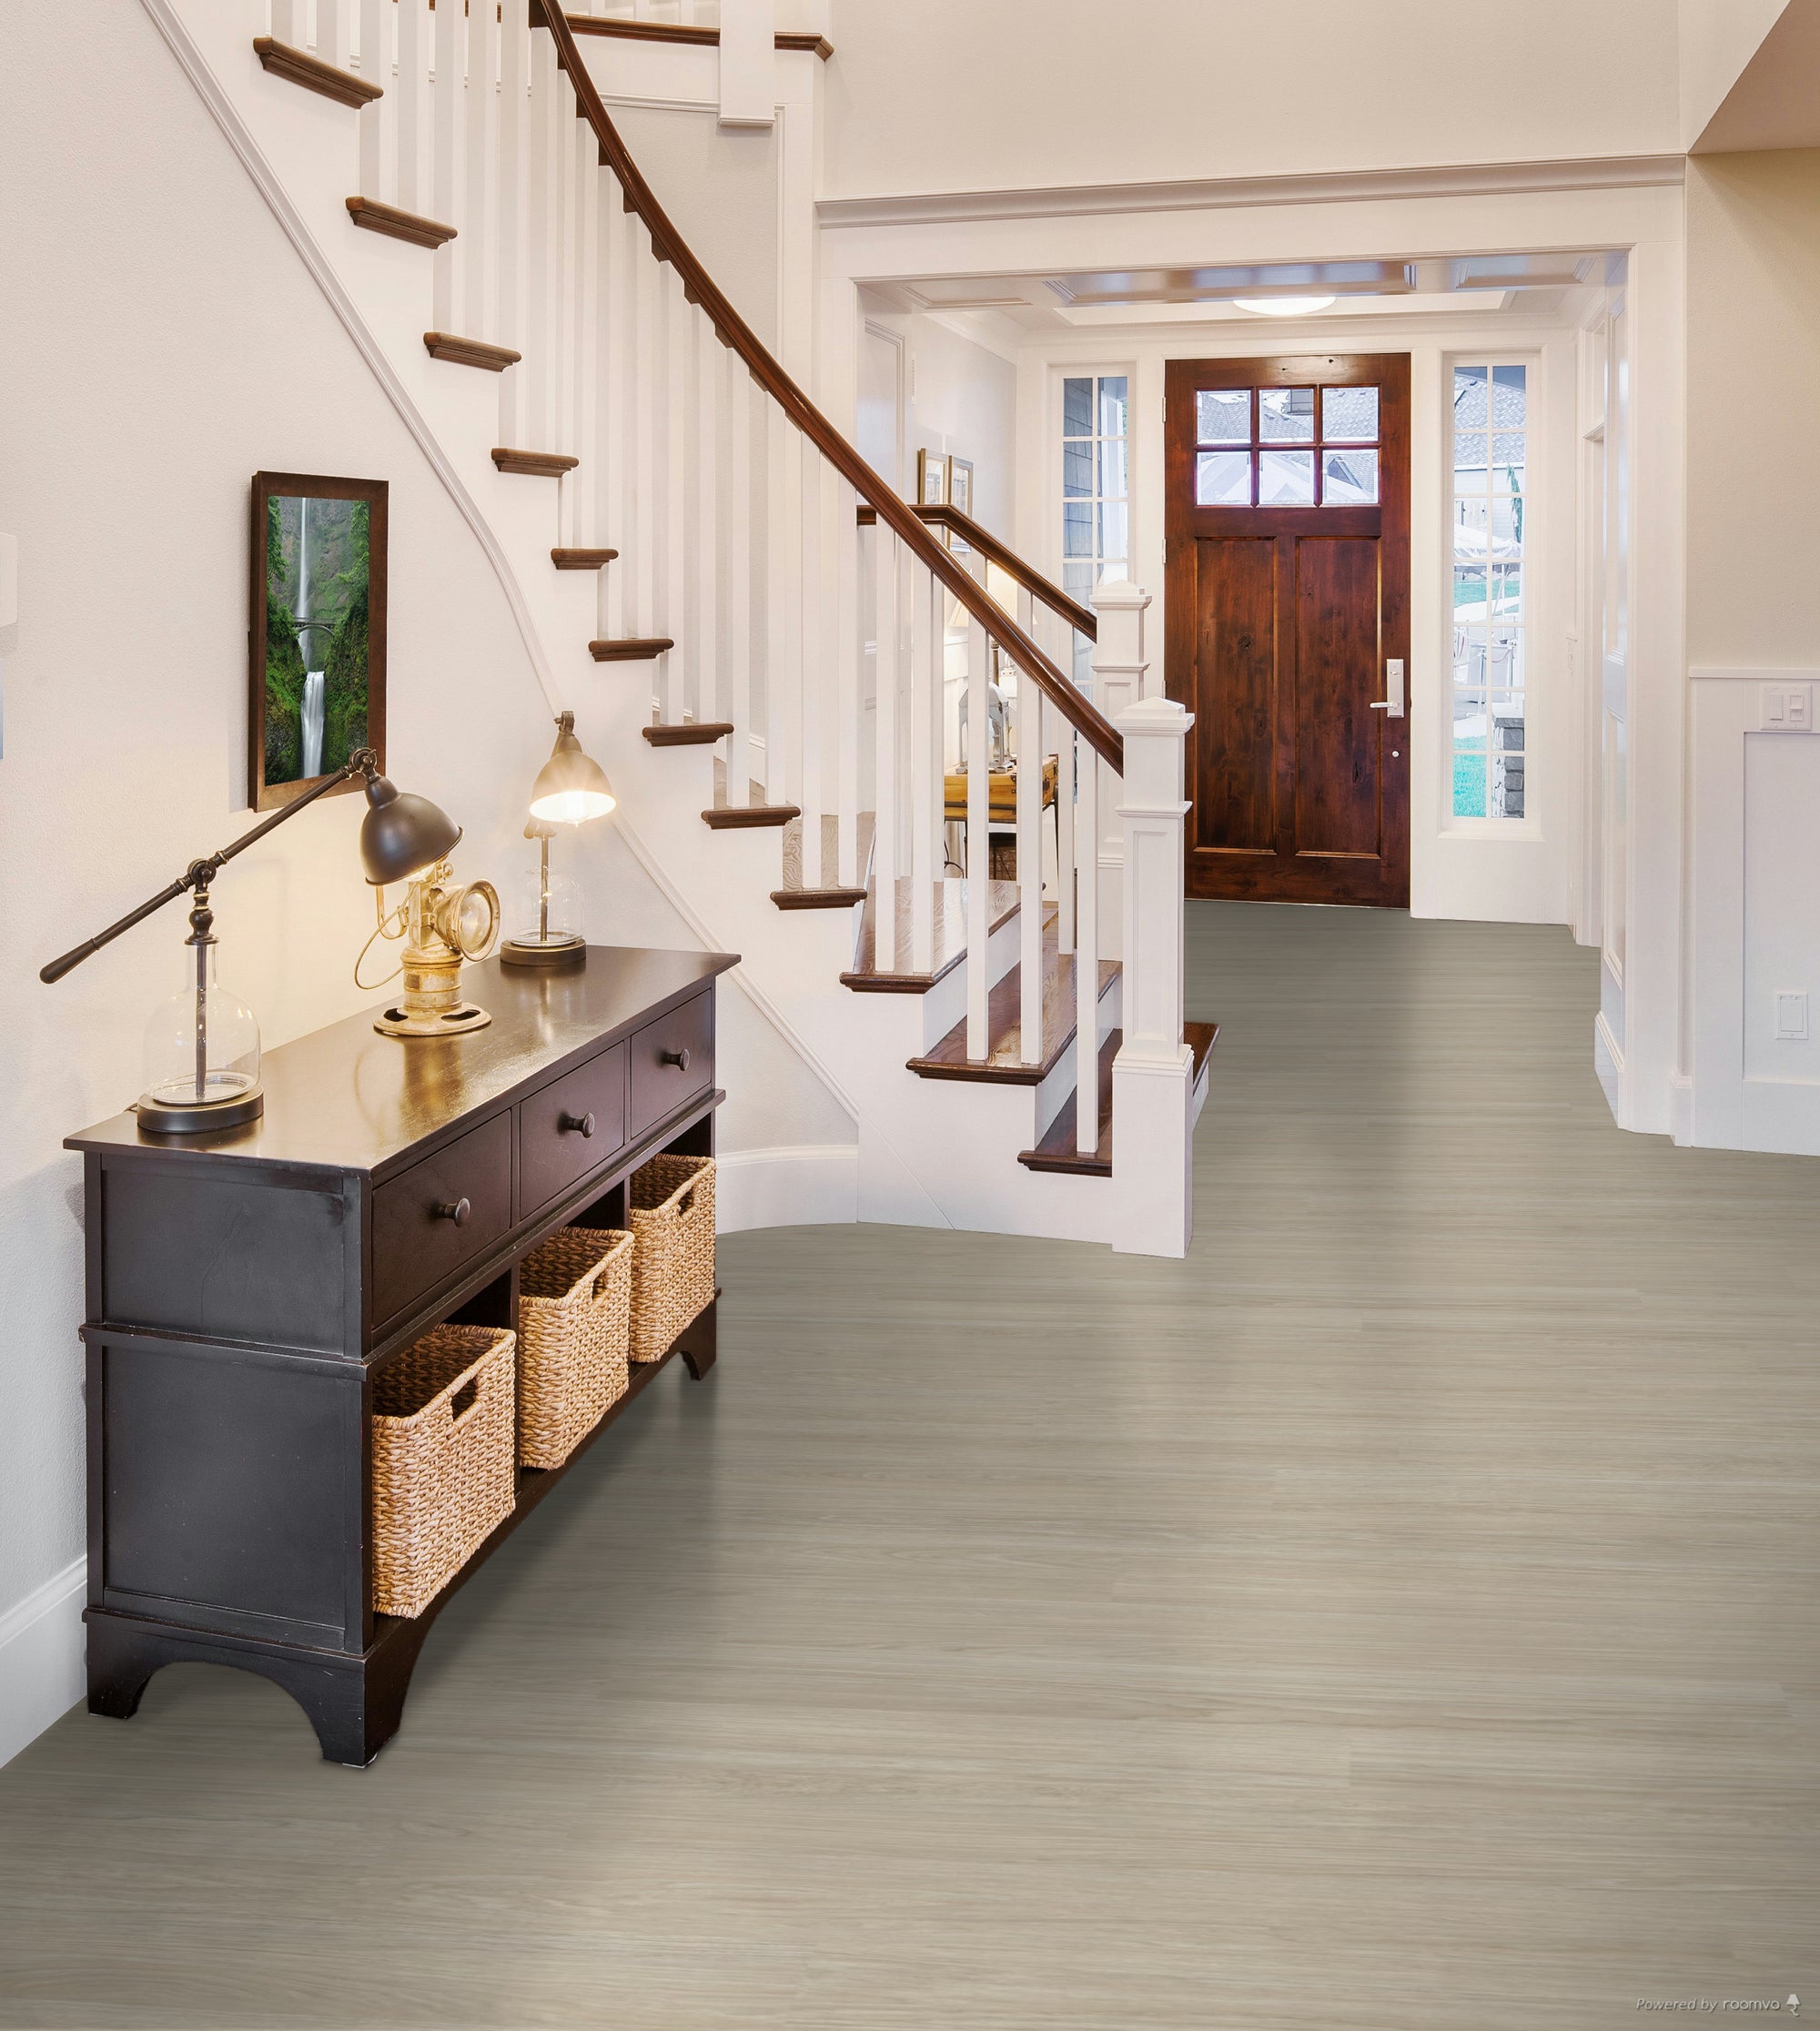 Engineered Floors - Rejuvenate Collection - 7 in. x 48 in. - Cashmere